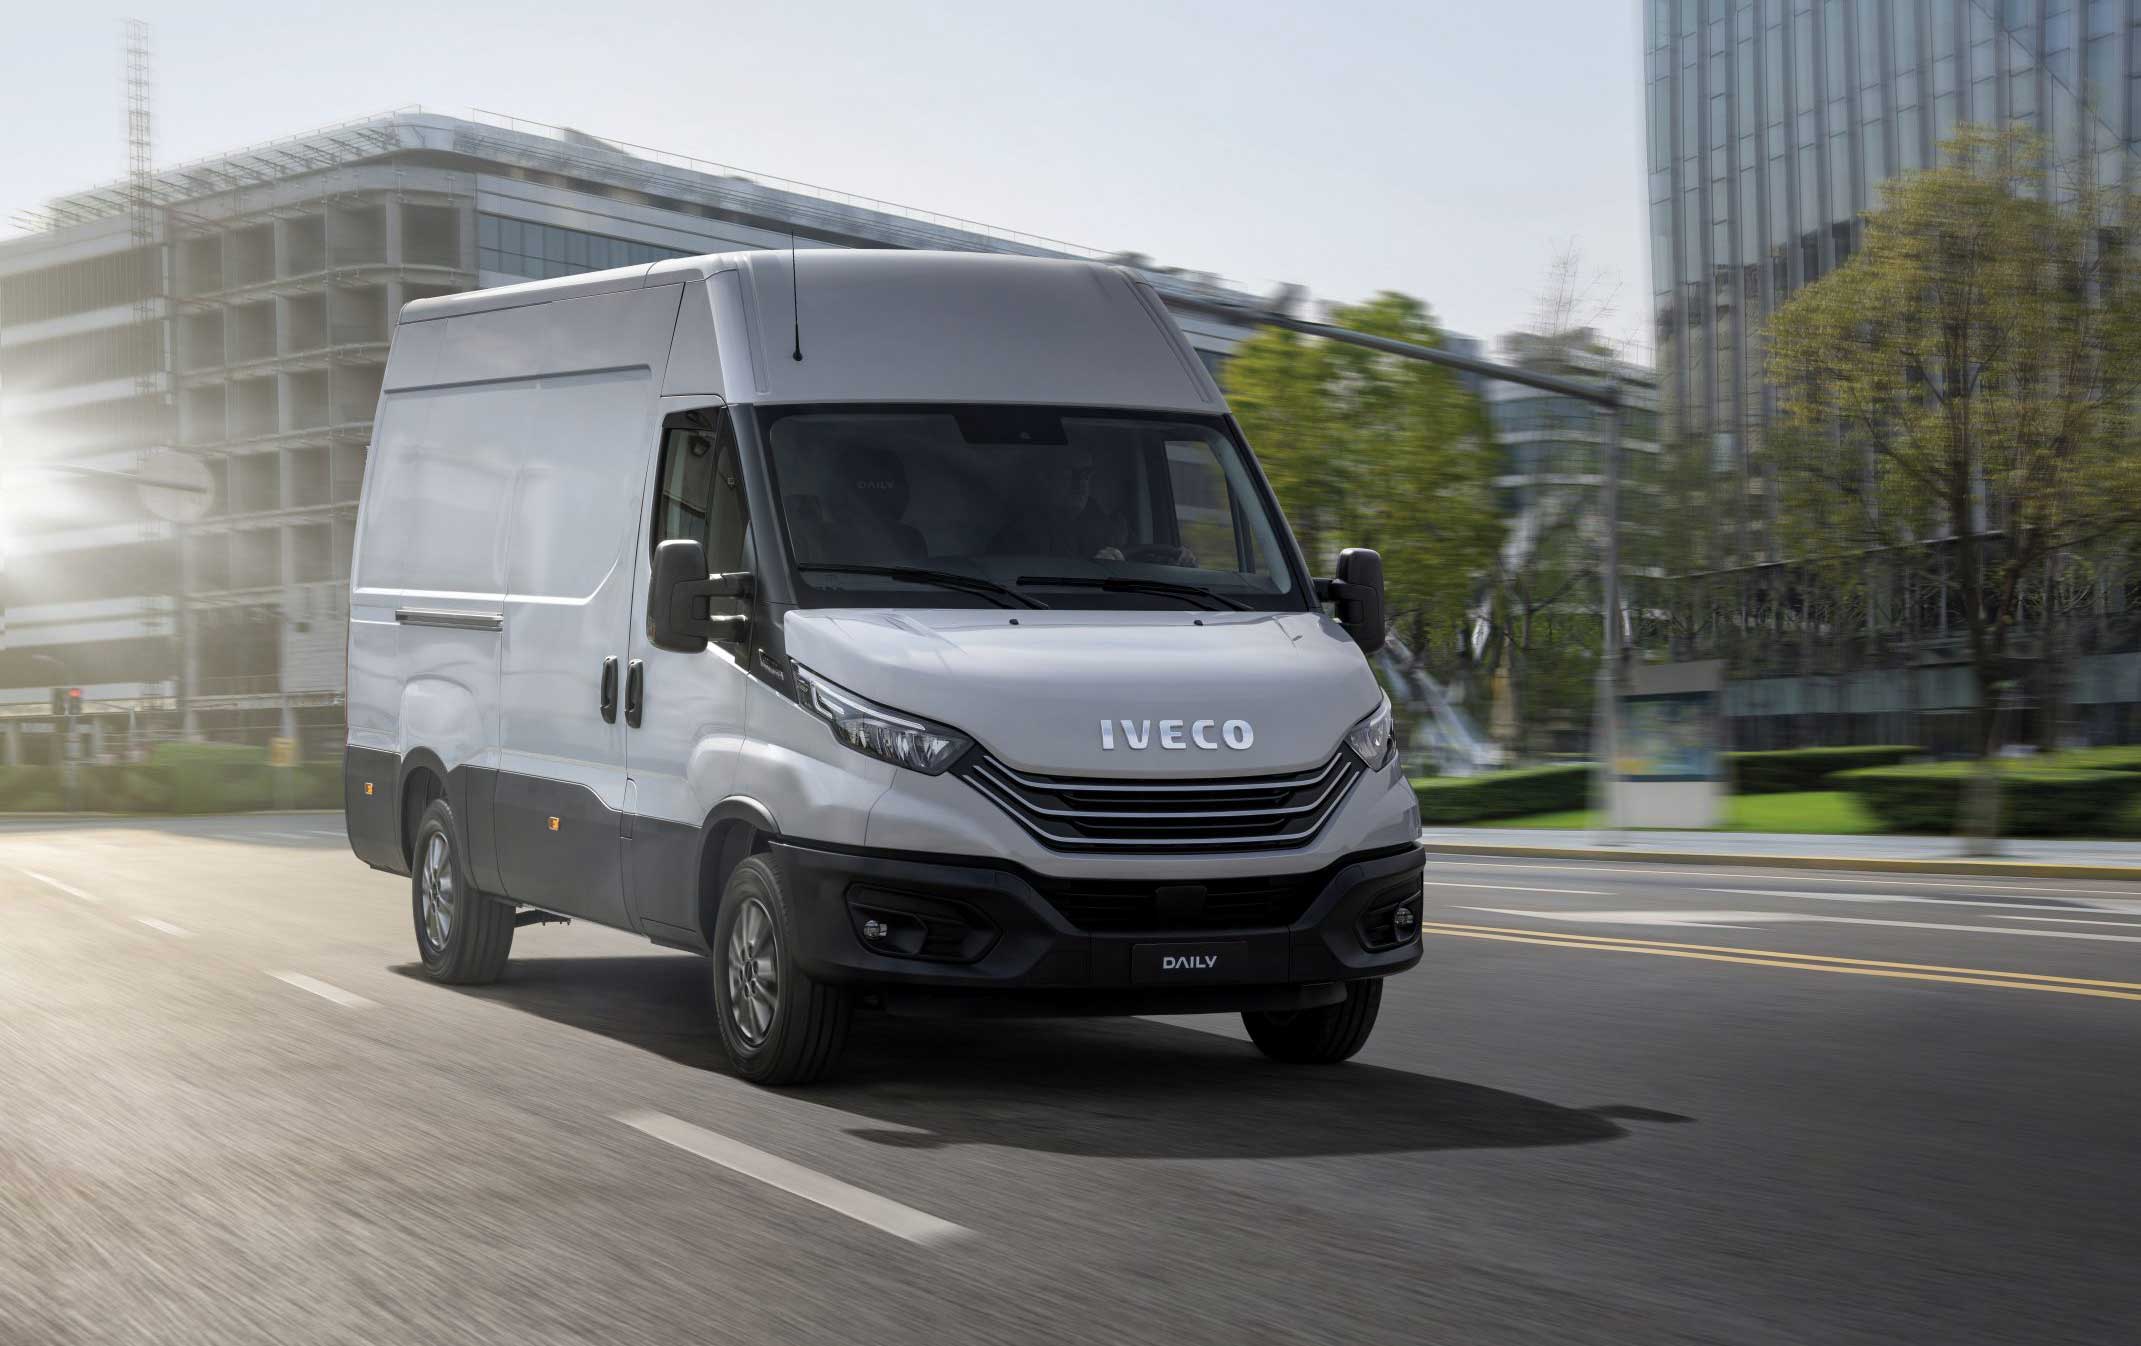 New IVECO vans from UK's largest independent IVECO dealer